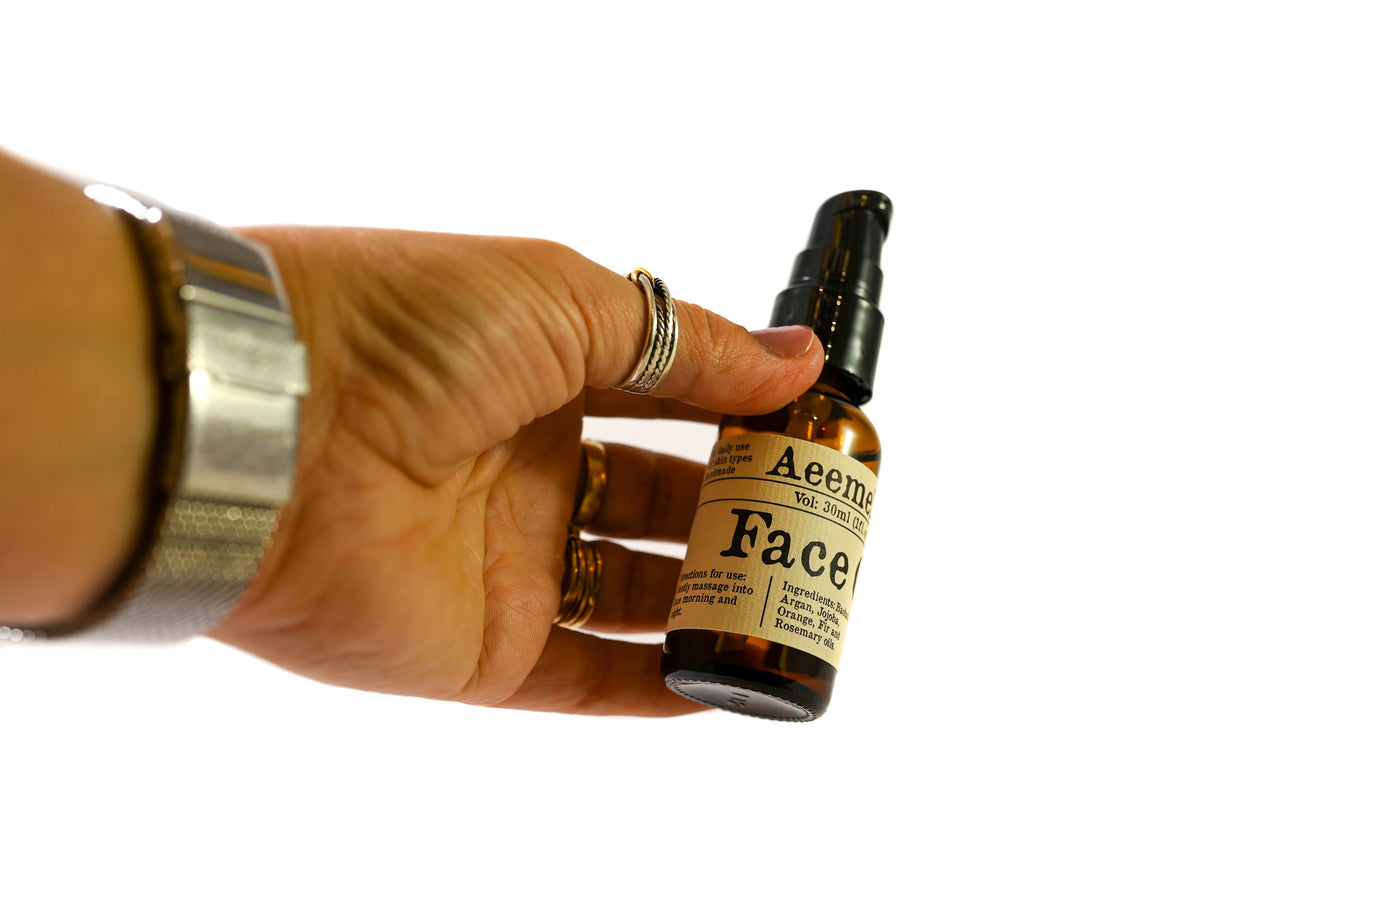 Aeemelia face oil, a nourishing, moisturizing, protective face oil steeped with the benefits of Baobab and Argan oils. Black pump top 1oz amber glass bottle with white and black label. Suitable for all skin types (including sensitive skin). Shown with a hand for reference on the size of the bottle. 